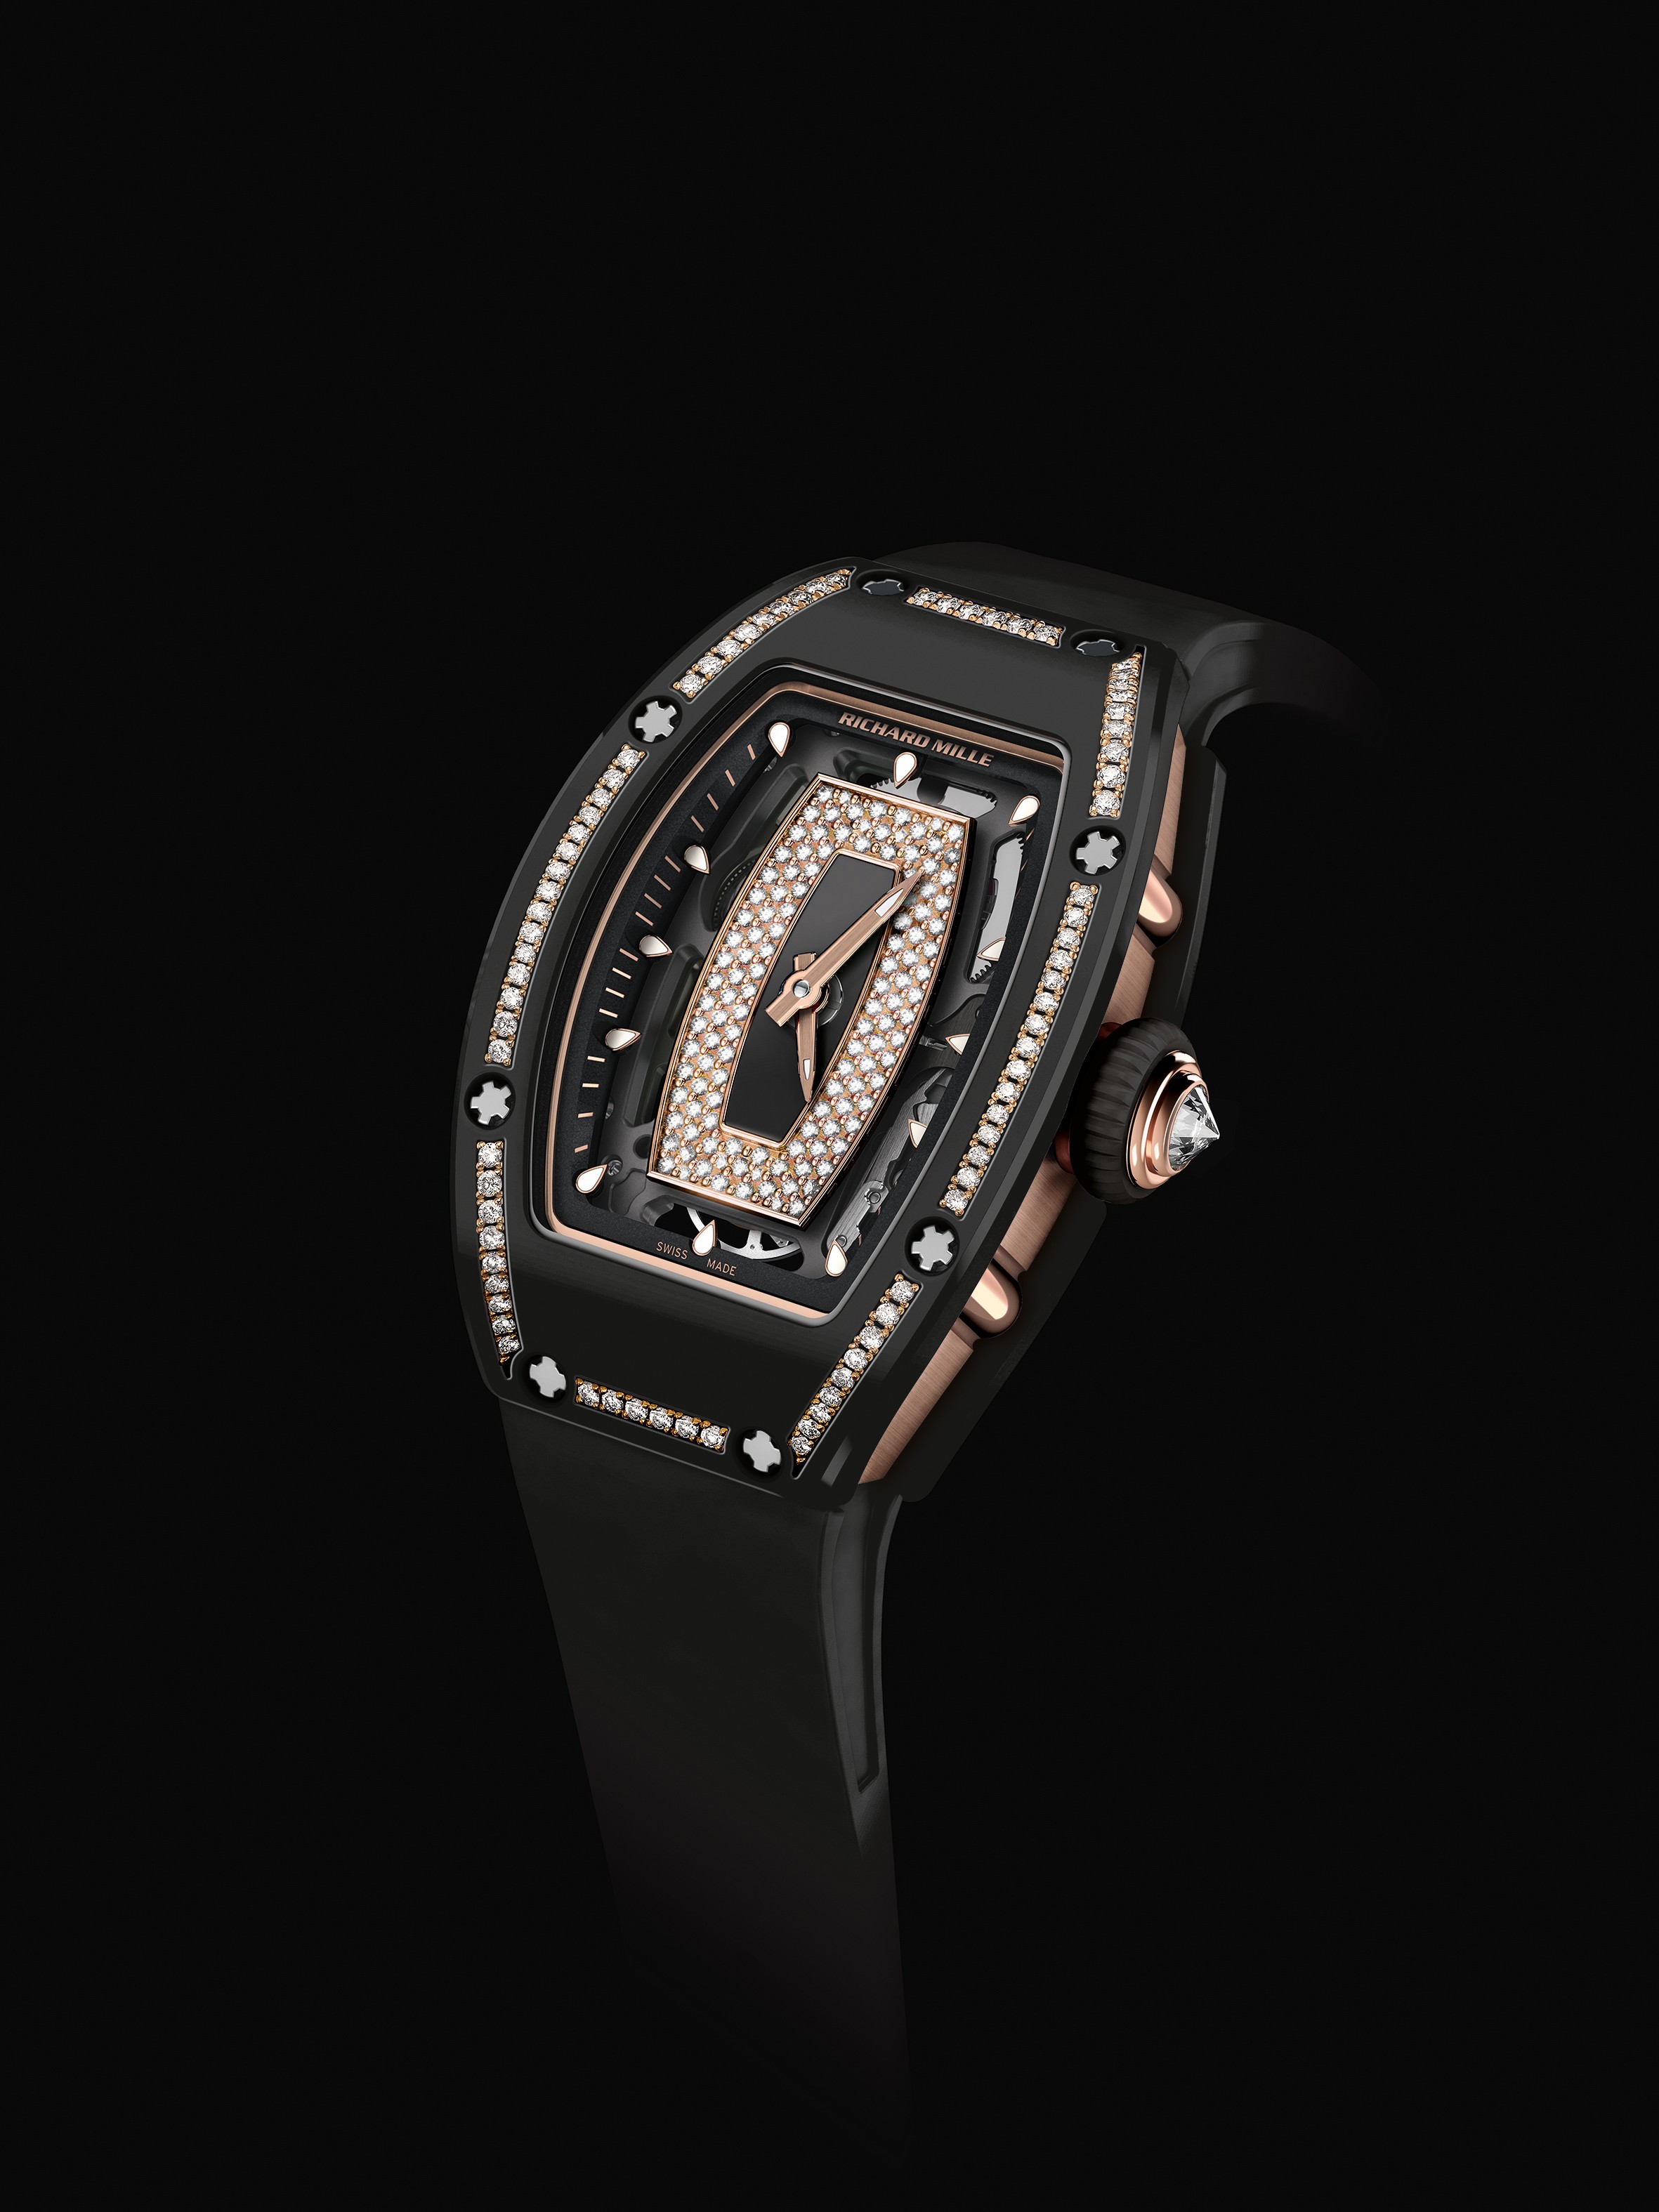 The RM07-01 from Richard Mille.